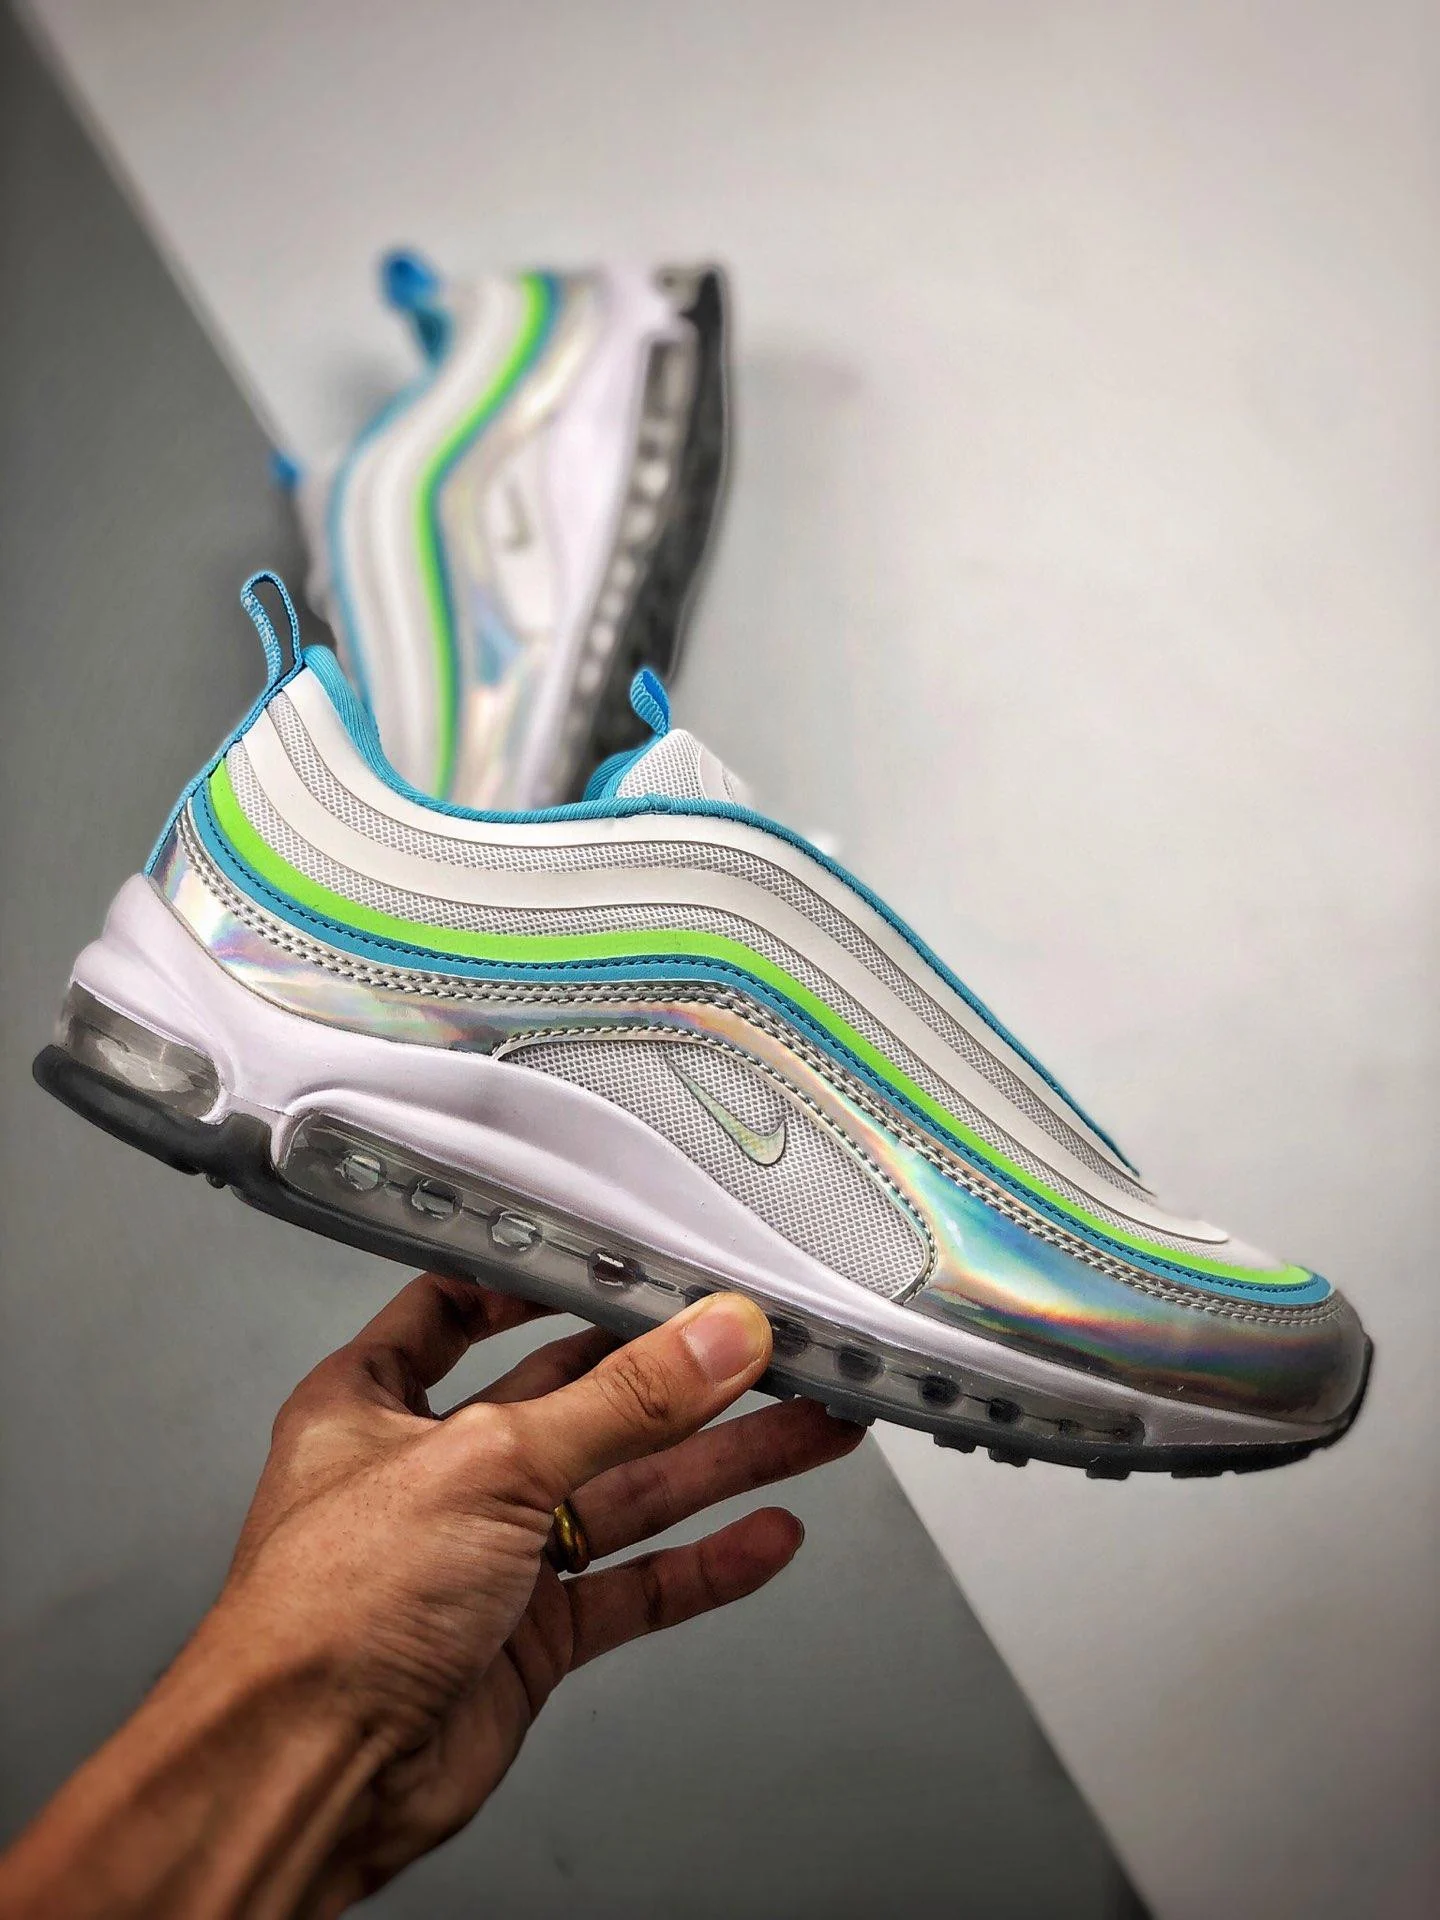 Nike Air Max 97 Iridescent Mudguards BV6670-101 On Sale